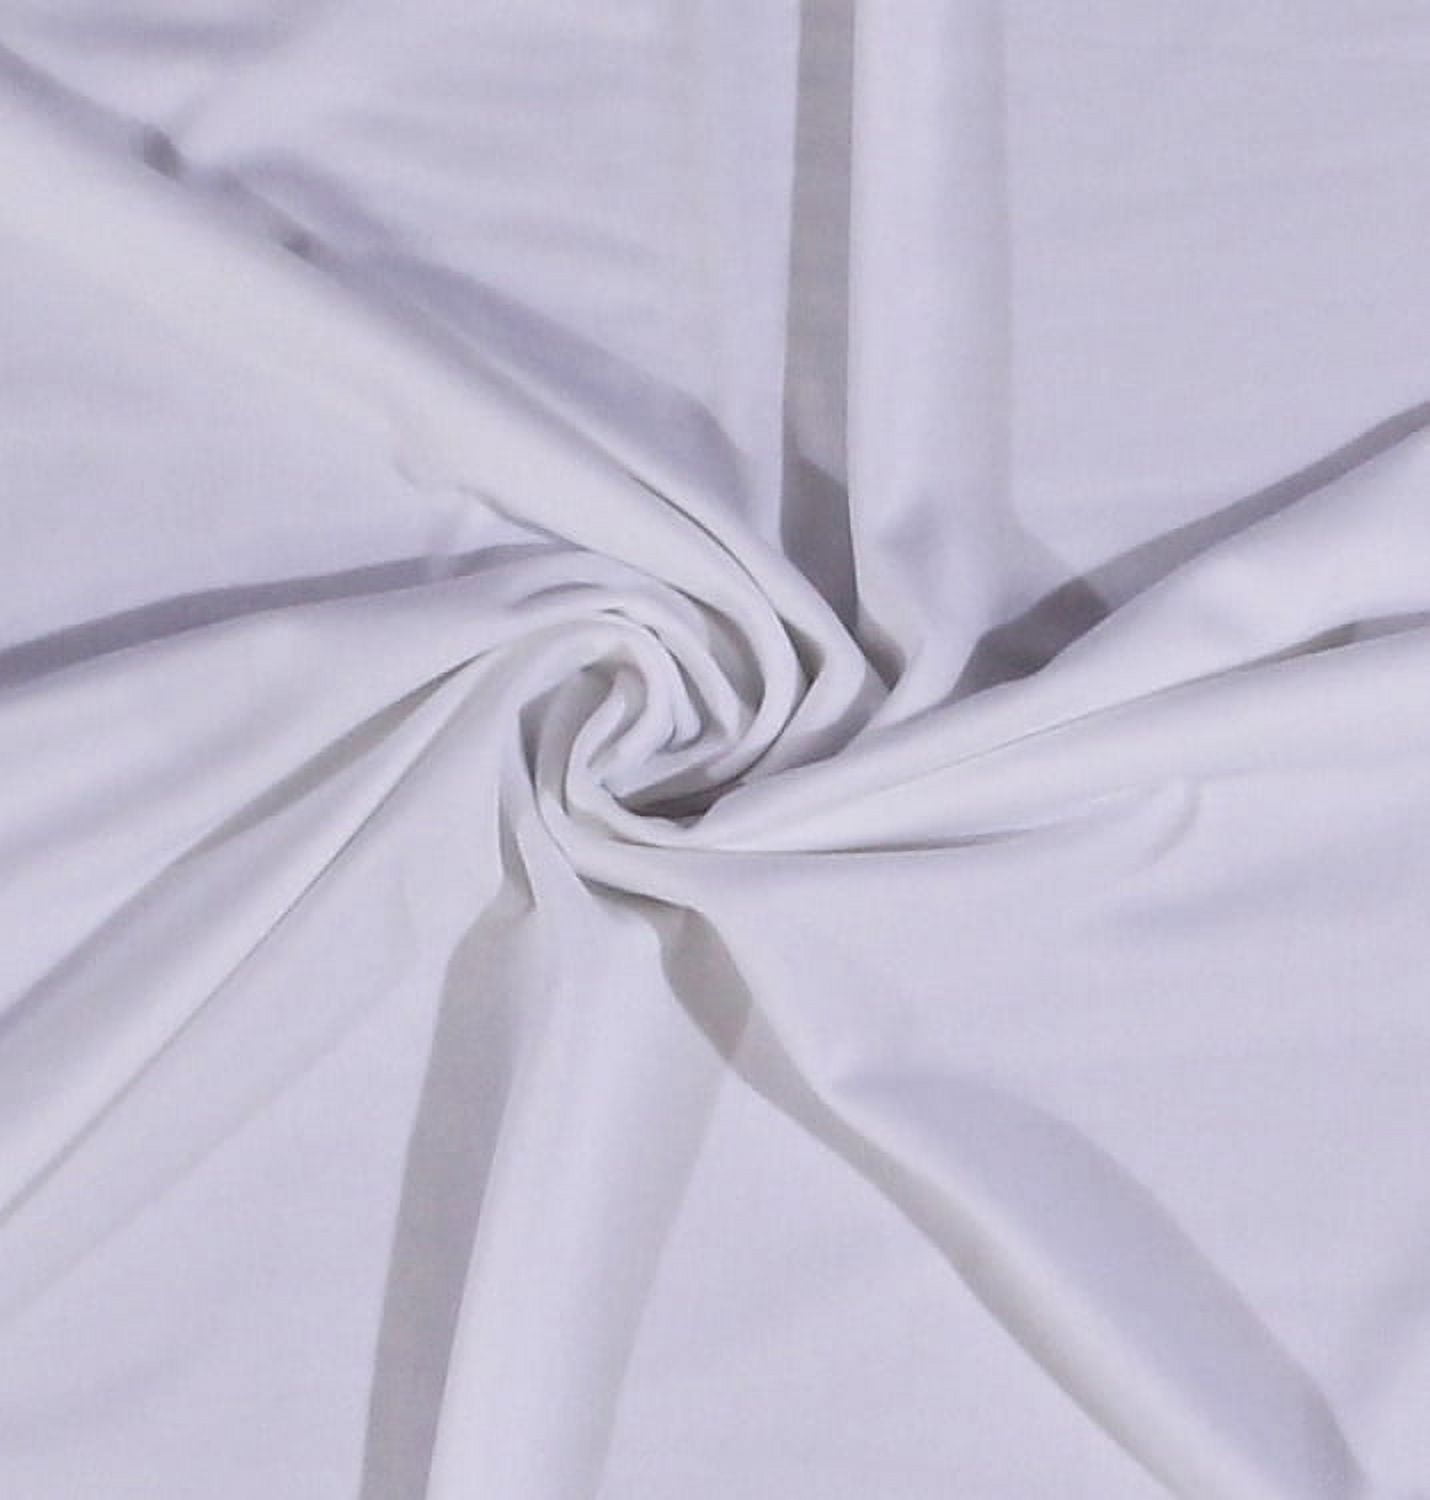 60 Stretch Lining White Semi-Sheer Lightweight Poly/Nylon/Spandex Fabric  by the Yard (D166.20) 